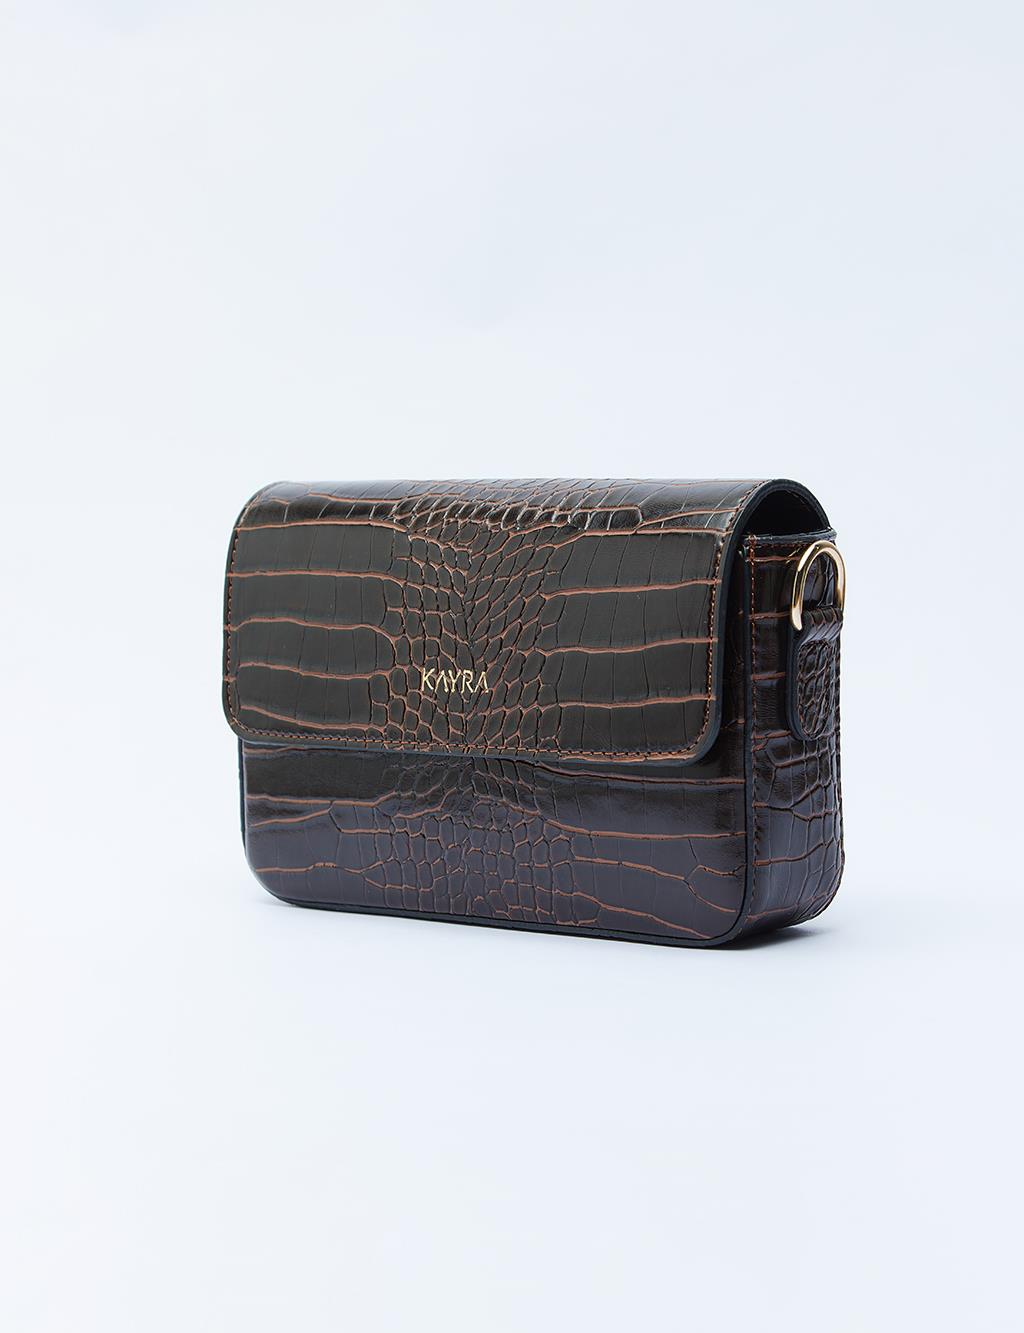 Croco Patterned Flap Bag with Woven Strap Brown